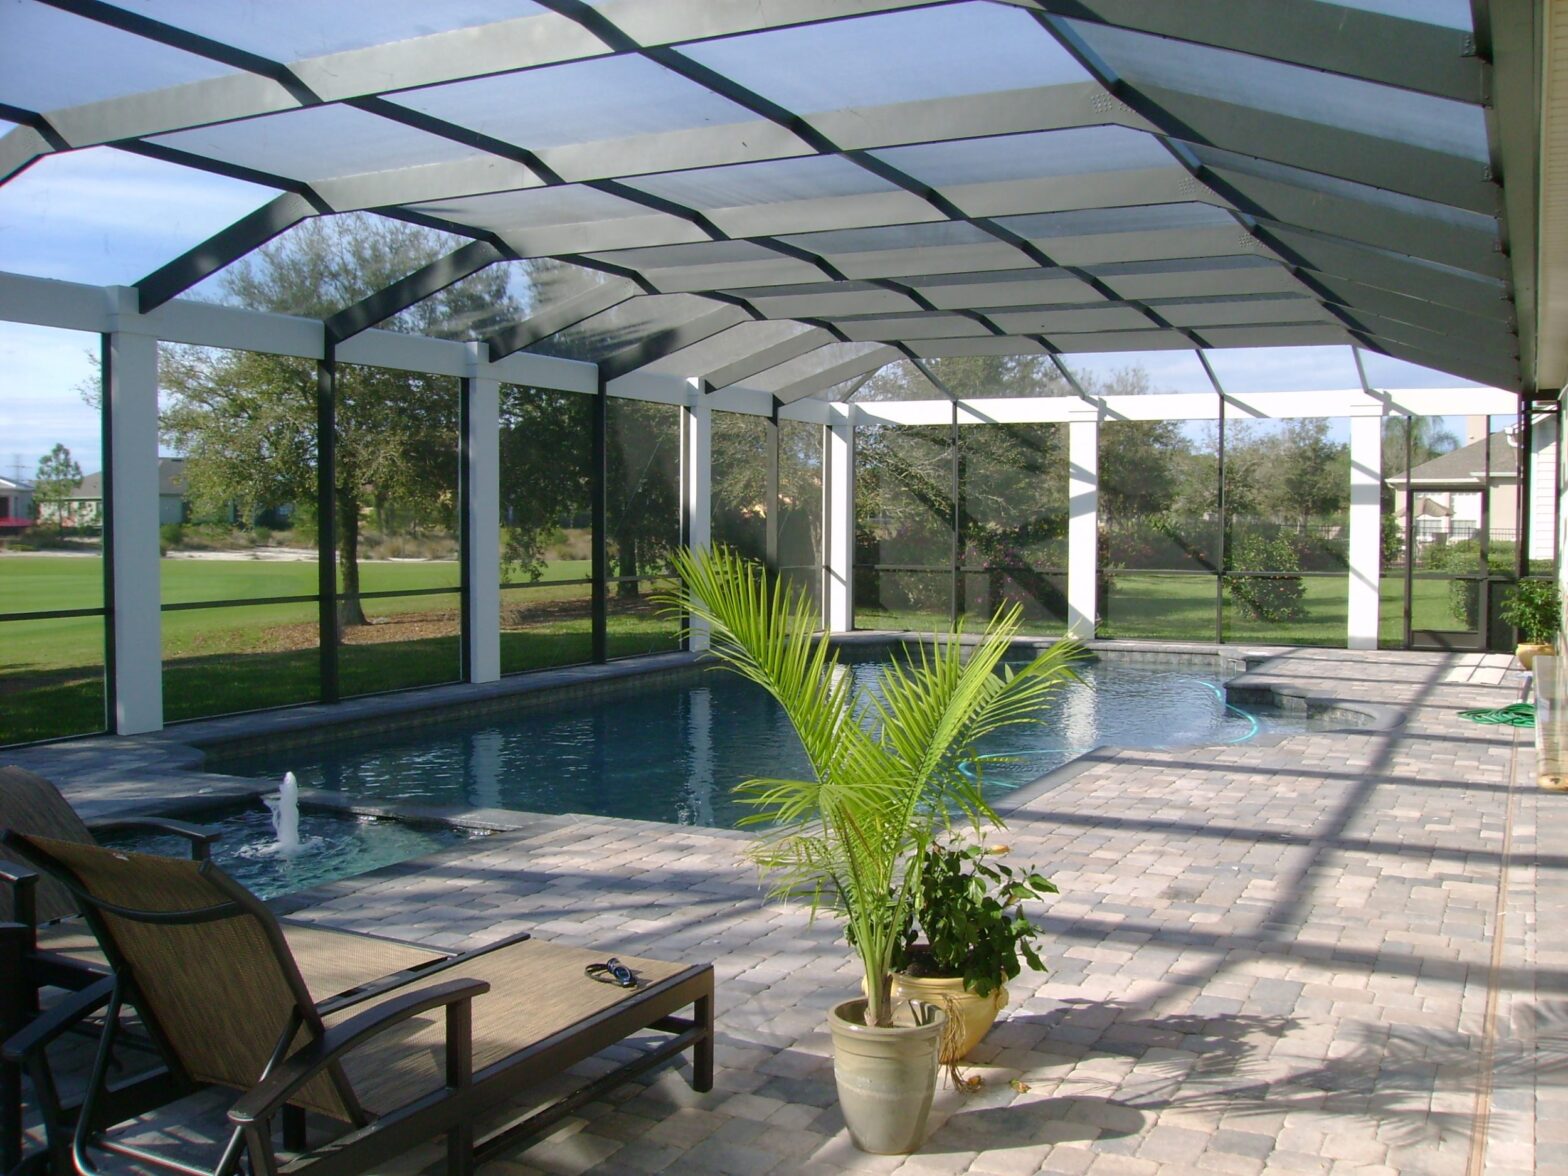 Featured image for post: Pool Enclosure Design Options Explained